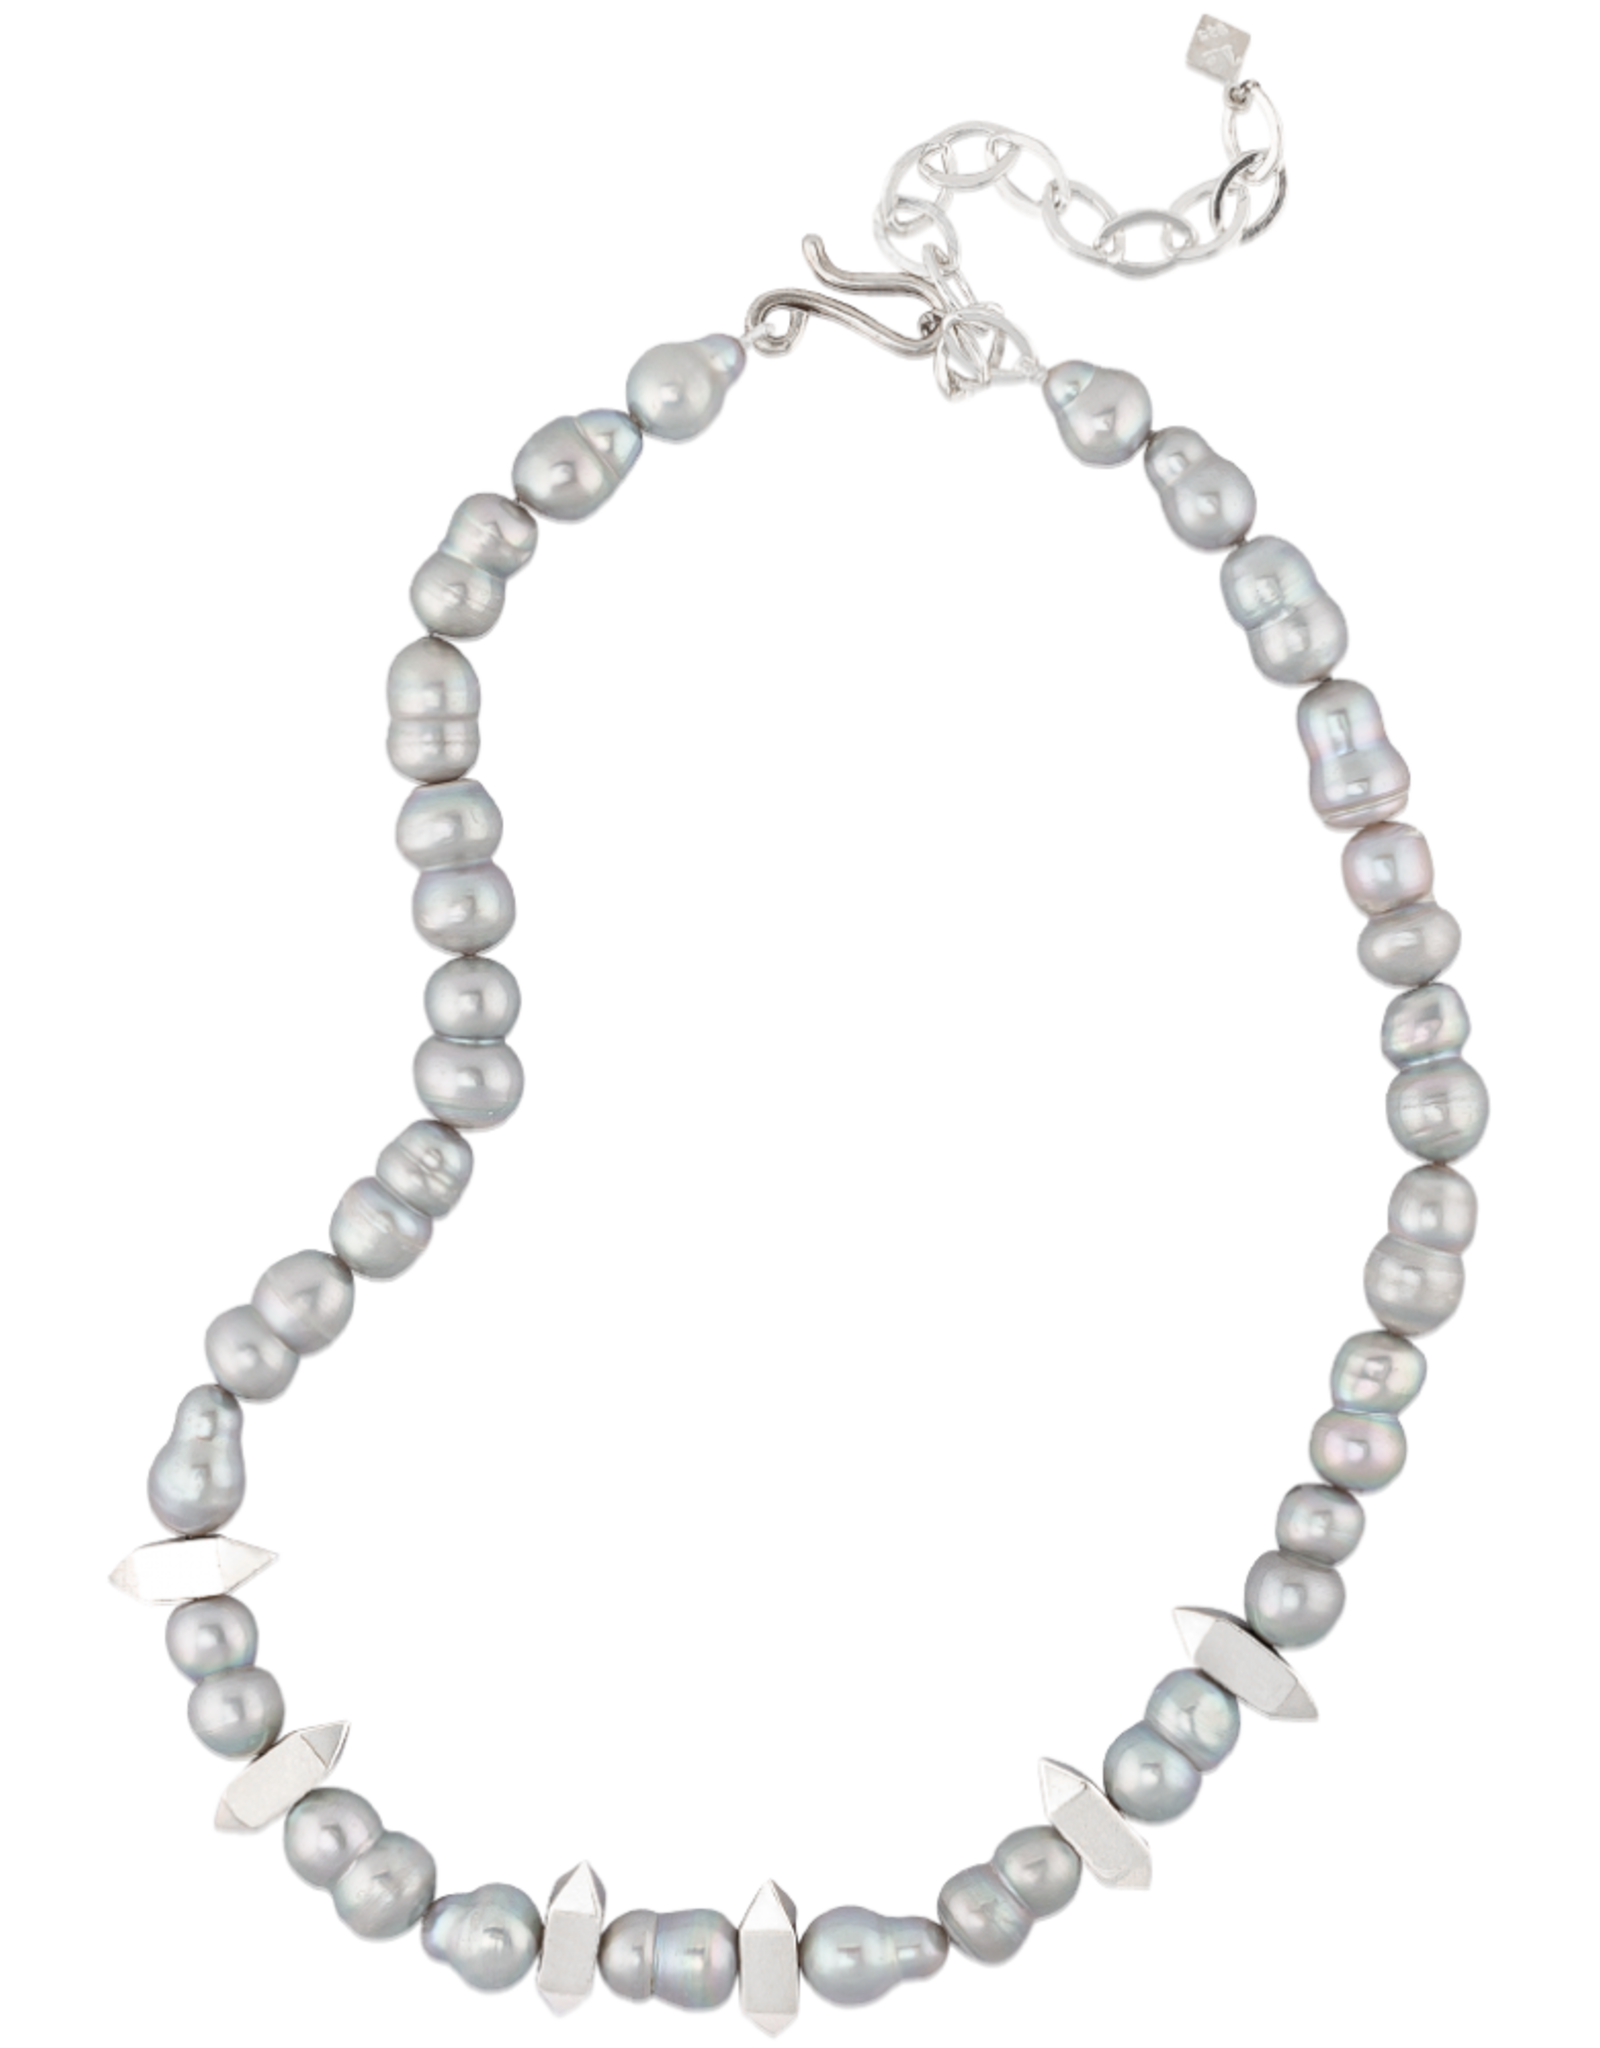 Mignon Faget Pylon Pathway Freshwater Pearl Necklace